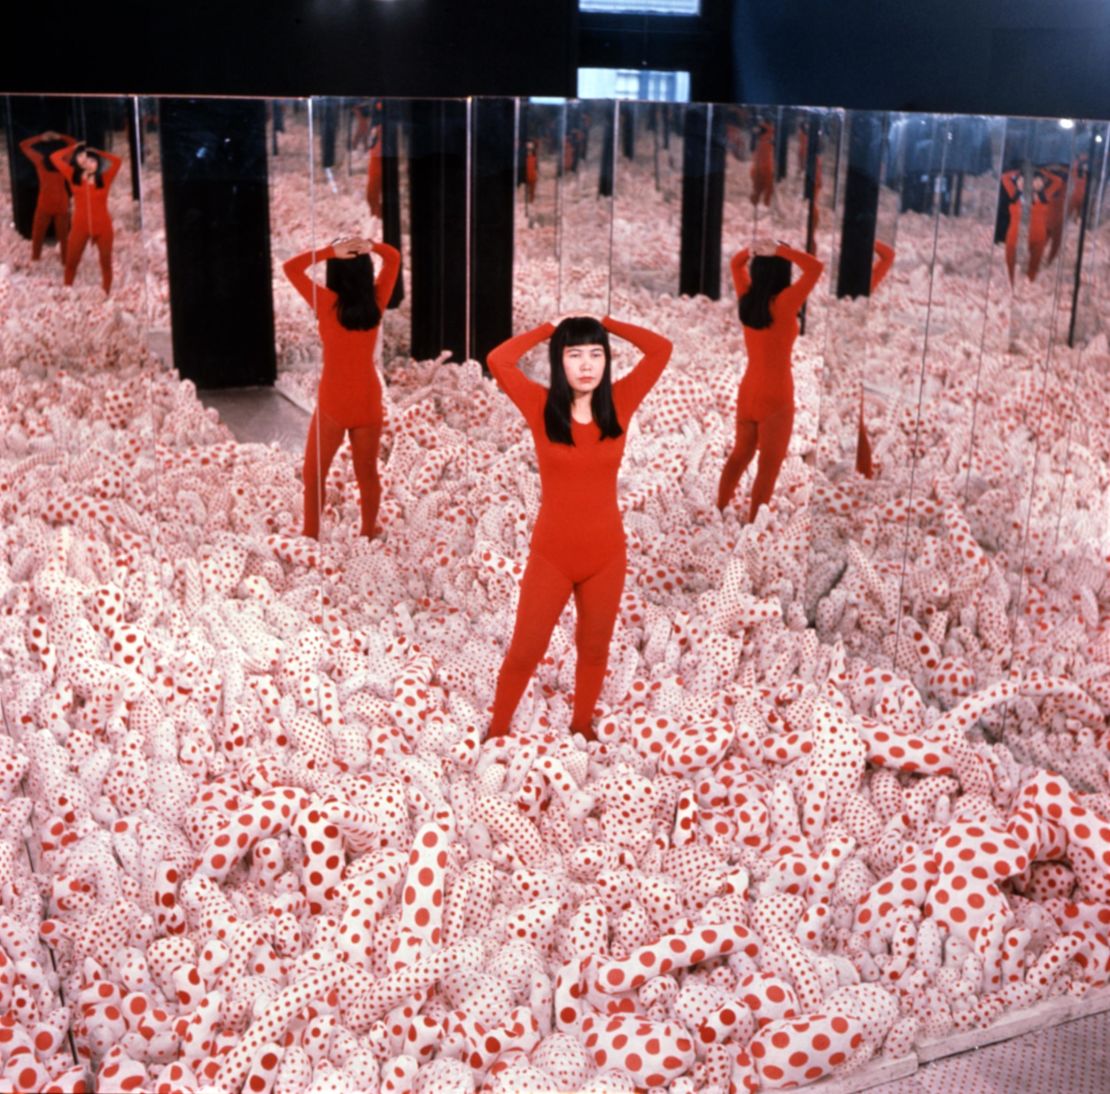 Kusama pictured inside her work "Infinity Mirror Room -- Phalli's Field" in 1965. The floor of the installation was covered with stuffed polka-dot phalluses.